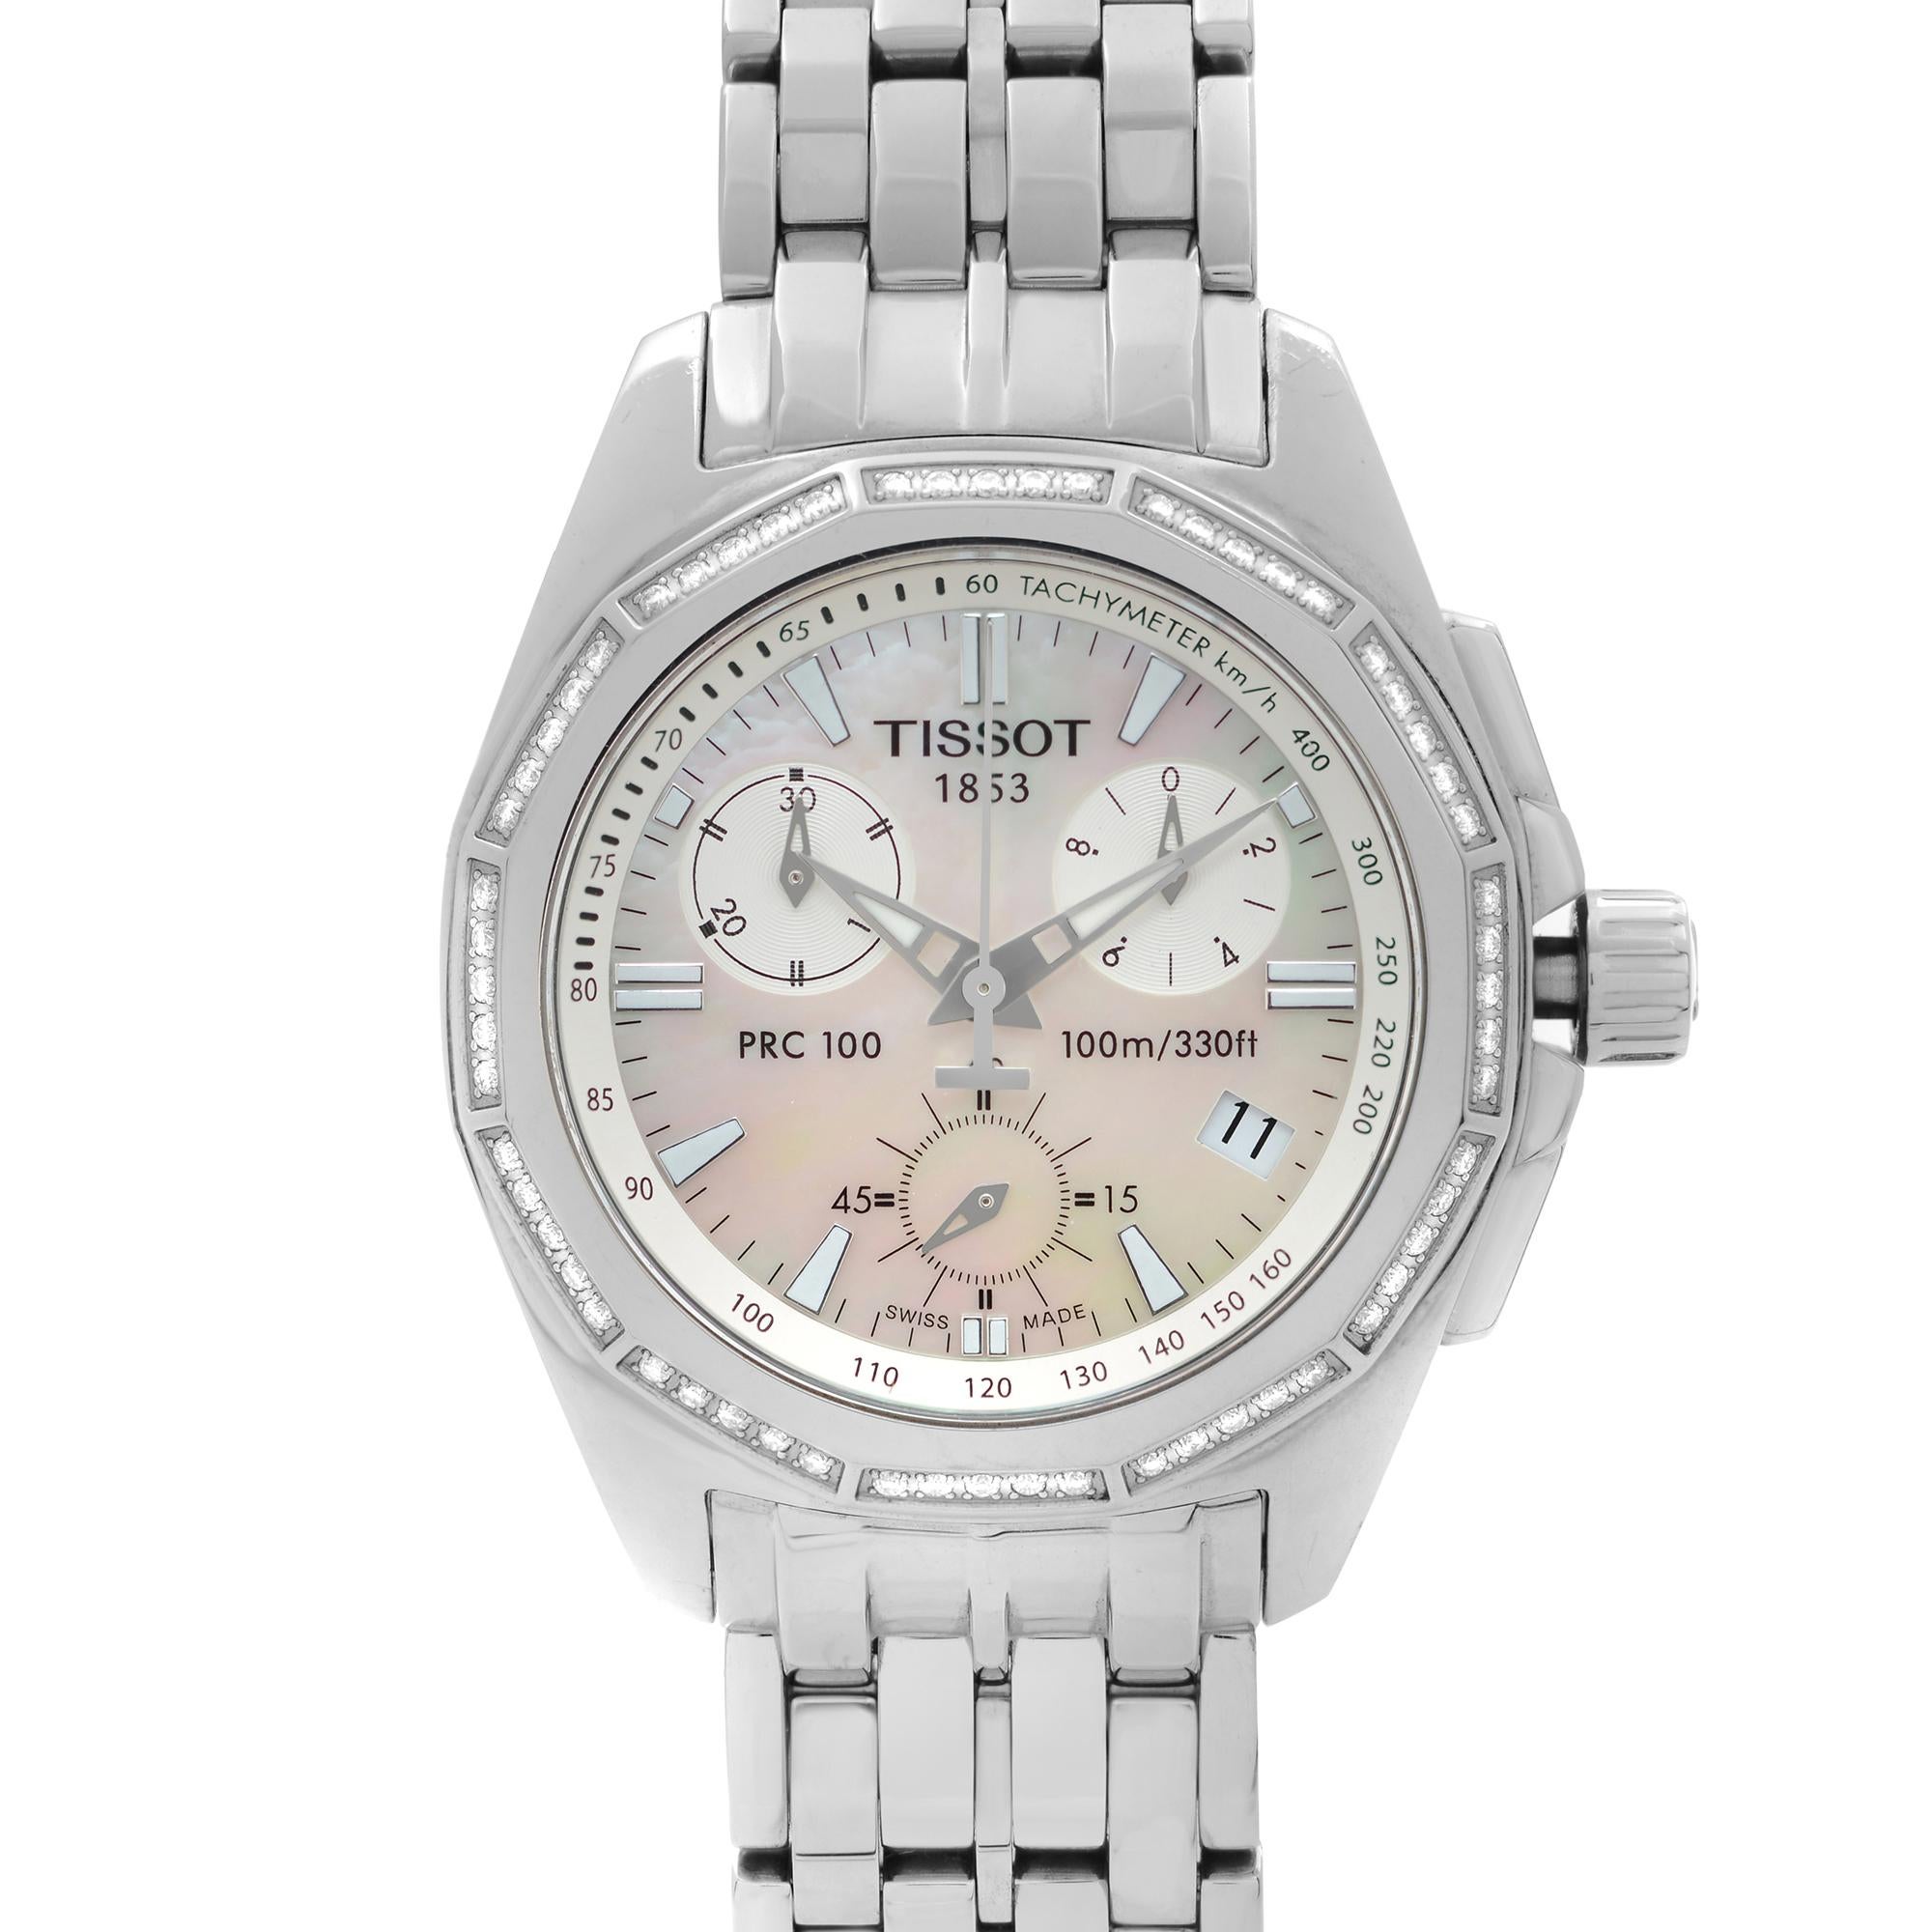 Pre-owned Tissot PRC 100 Quart Ladies Watch T22.1.486.21. The Watch Has Tiny Scratches on the Case Back. This Beautiful Timepiece is Powered by Quartz (Battery) Movement and Features: Rounds Stainless Steel Case and Bracelet, Fixed Stainless Steel